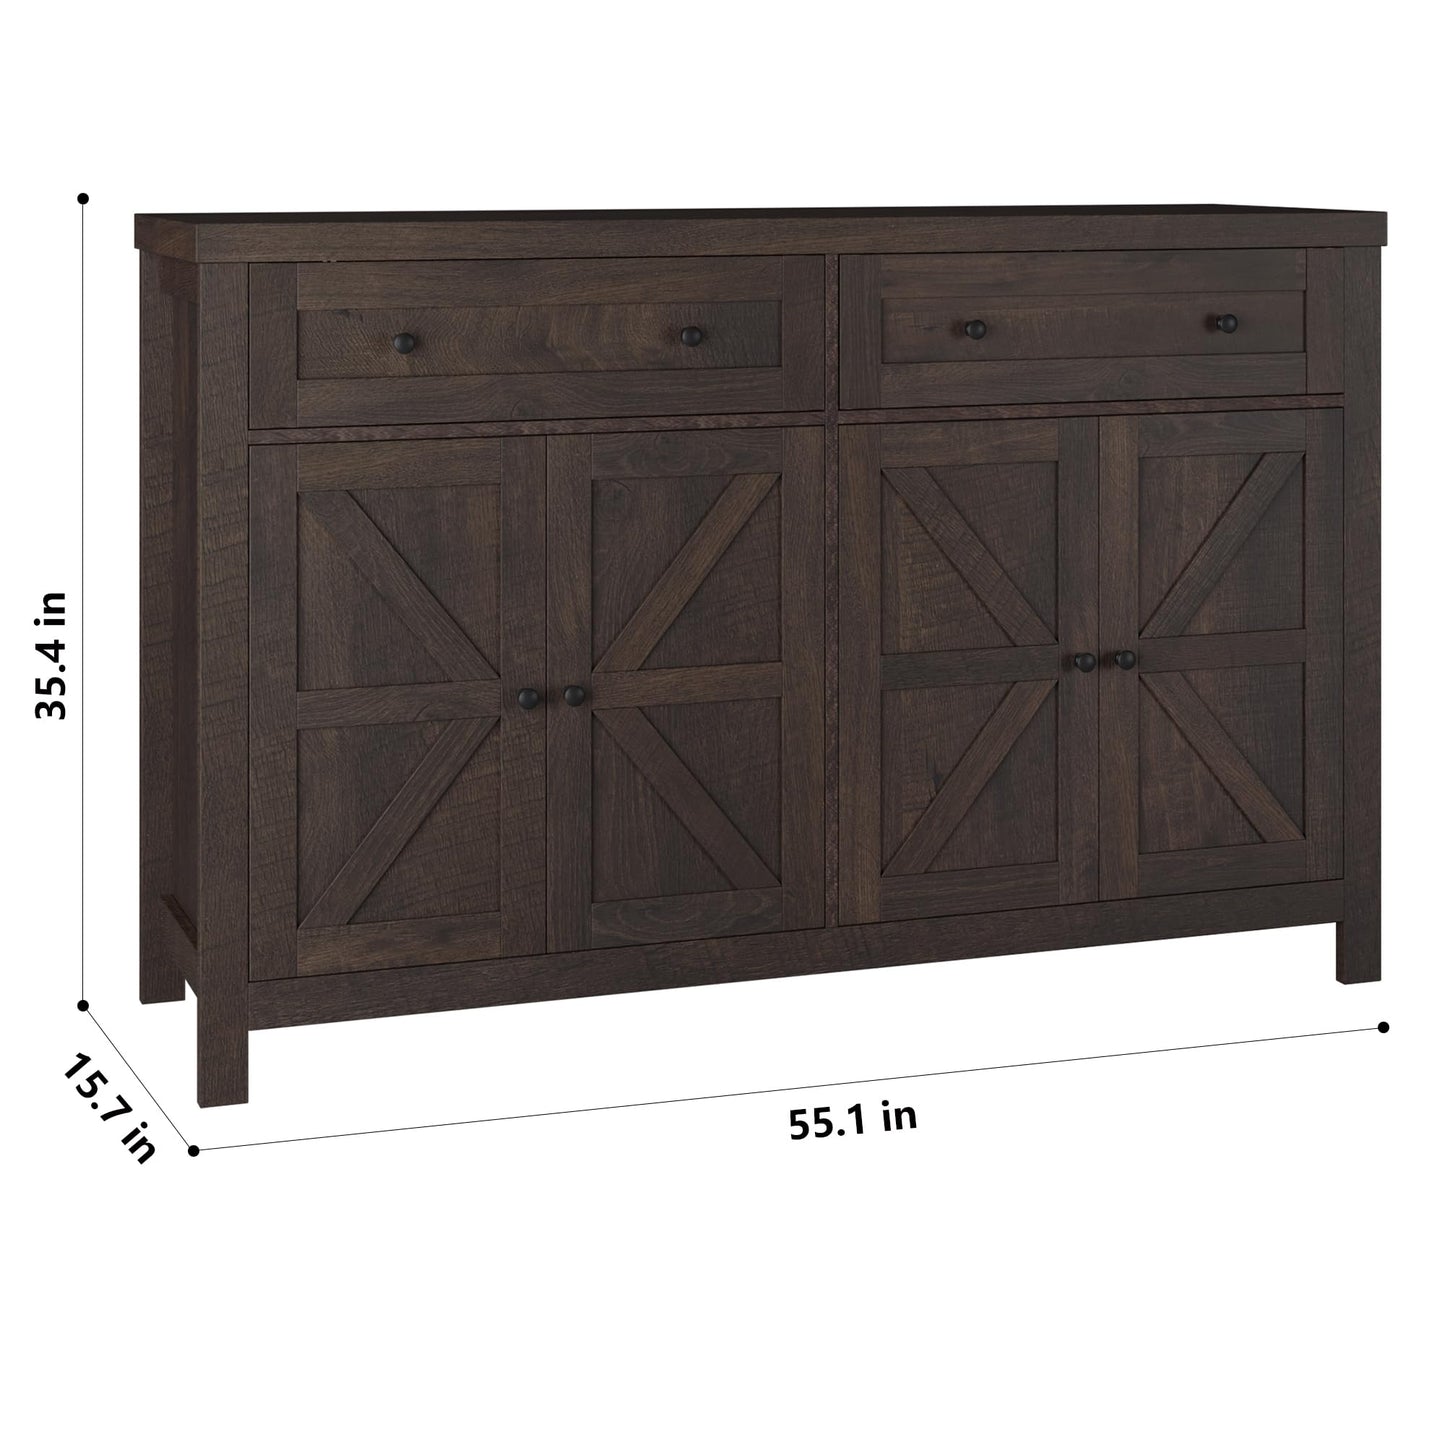 HOSTACK 55" Buffet Sideboard Cabinet with Storage, Modern Farmhouse Coffee Bar Cabinet with Drawers and Shelves, Barn Doors Storage Cabinet for